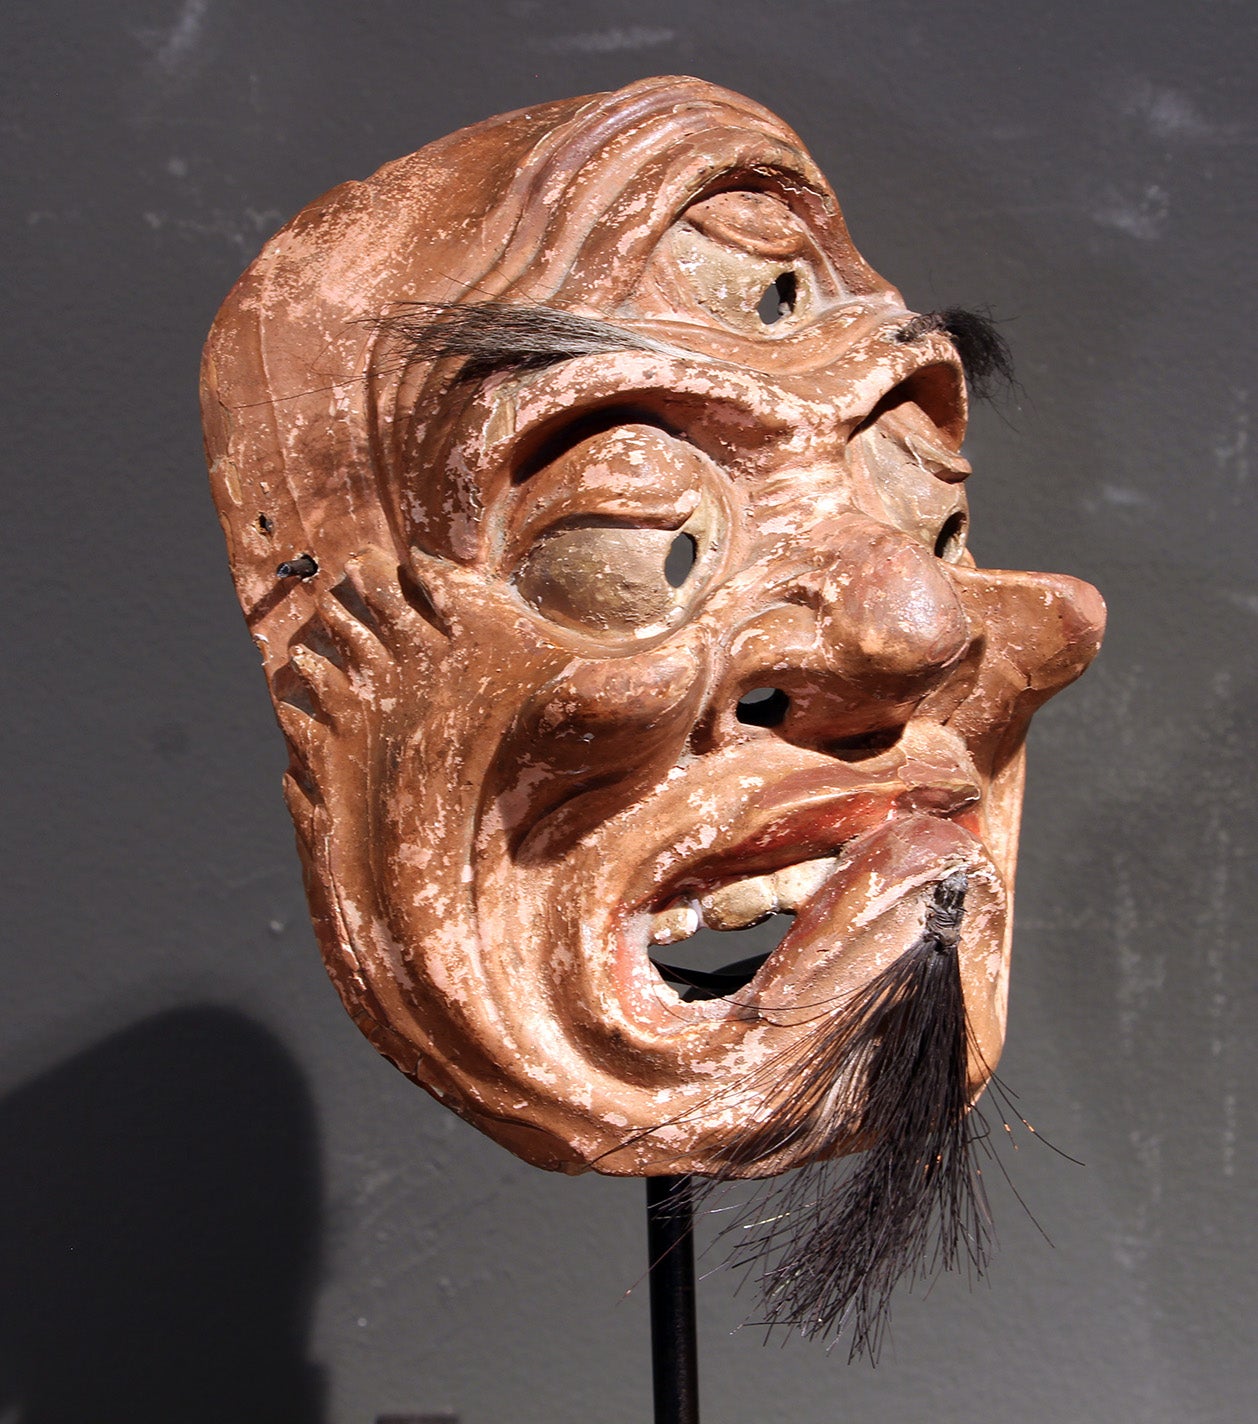 A rare three-eyed Japanese Bukaku comic demon mask, dating from the early Edo period, but could also be from the late Momoyama period.
The early Edo period is the golden age of Noh tragic theater.
It is sculpted by accentuating the depth of the eye